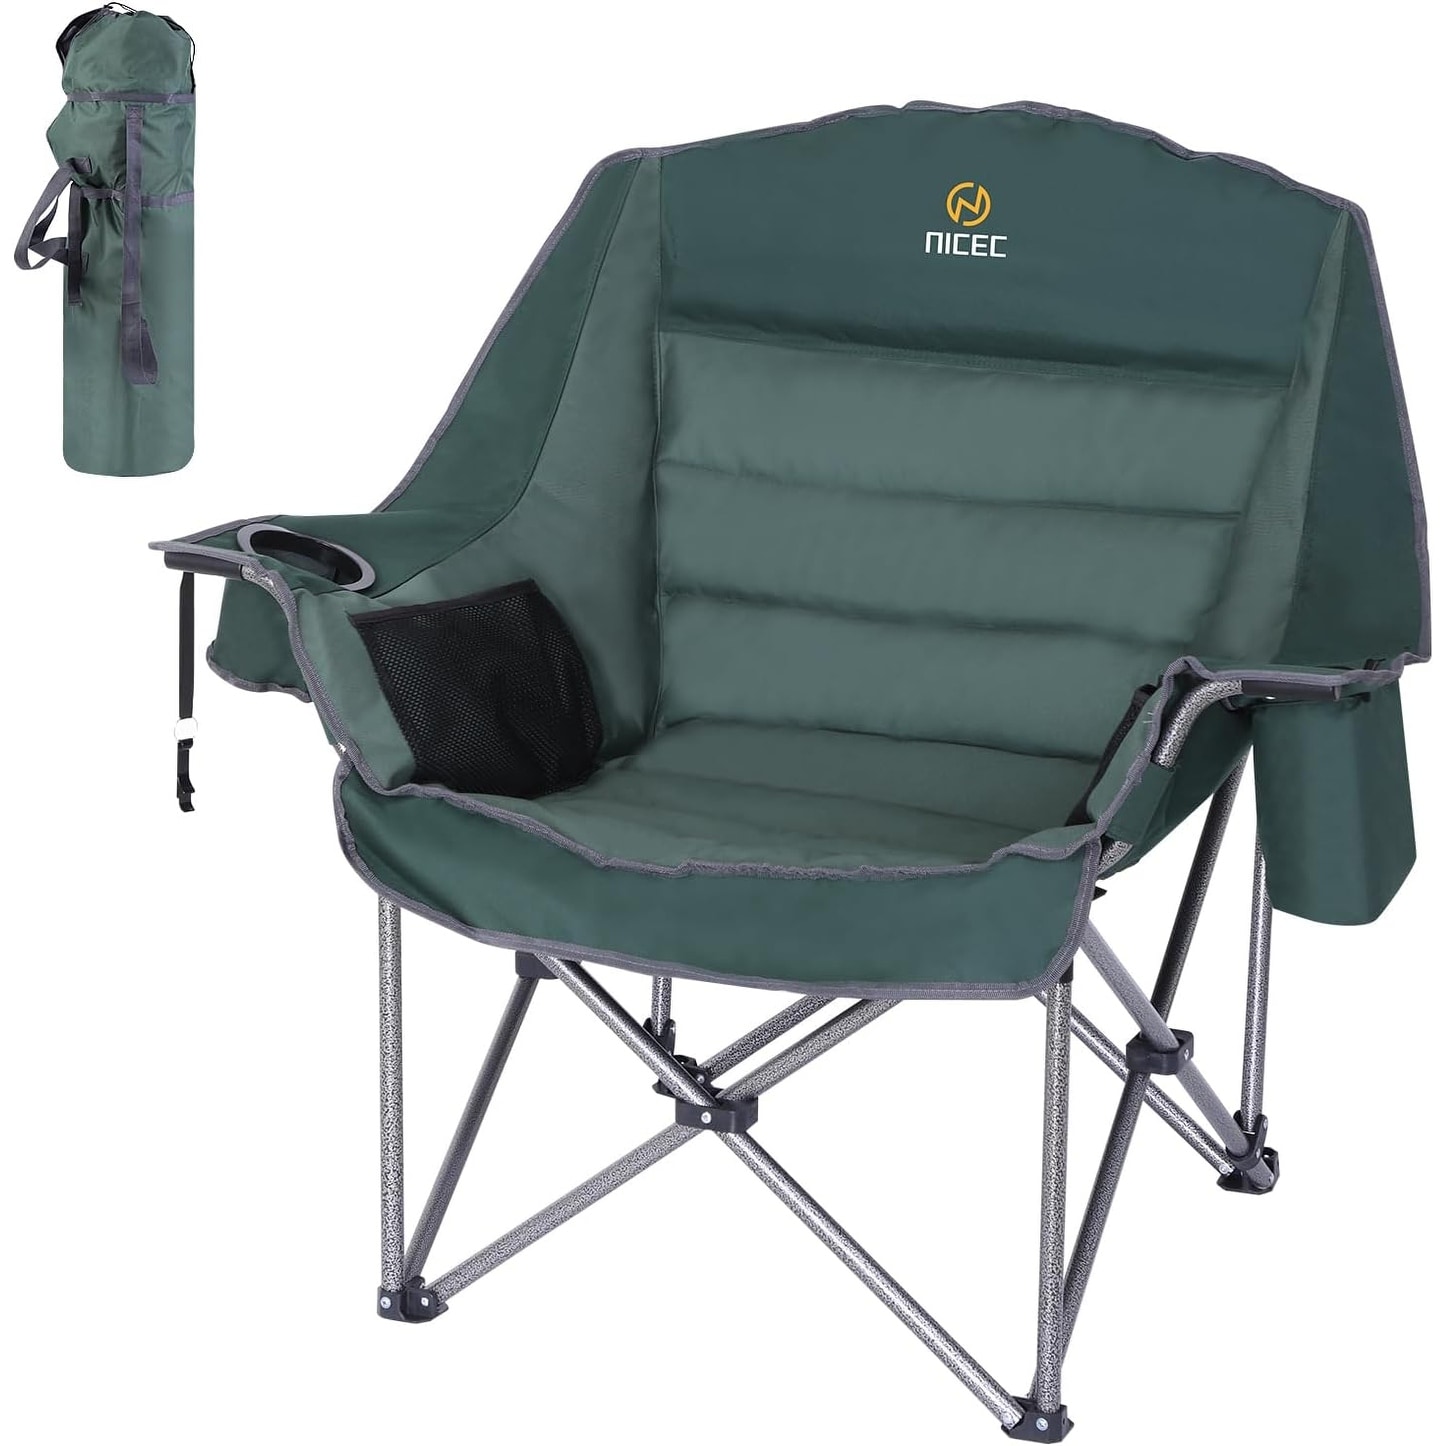 https://ak1.ostkcdn.com/images/products/is/images/direct/dab64328503eb1b56a8ed8768bde108b282c256f/Camping-Chairs%2C-Oversized-XL-Padded-Camping-Chair%2C-Outdoor-Chair%2C-Lounge-Chair%2C-Wide%26Thick.jpg